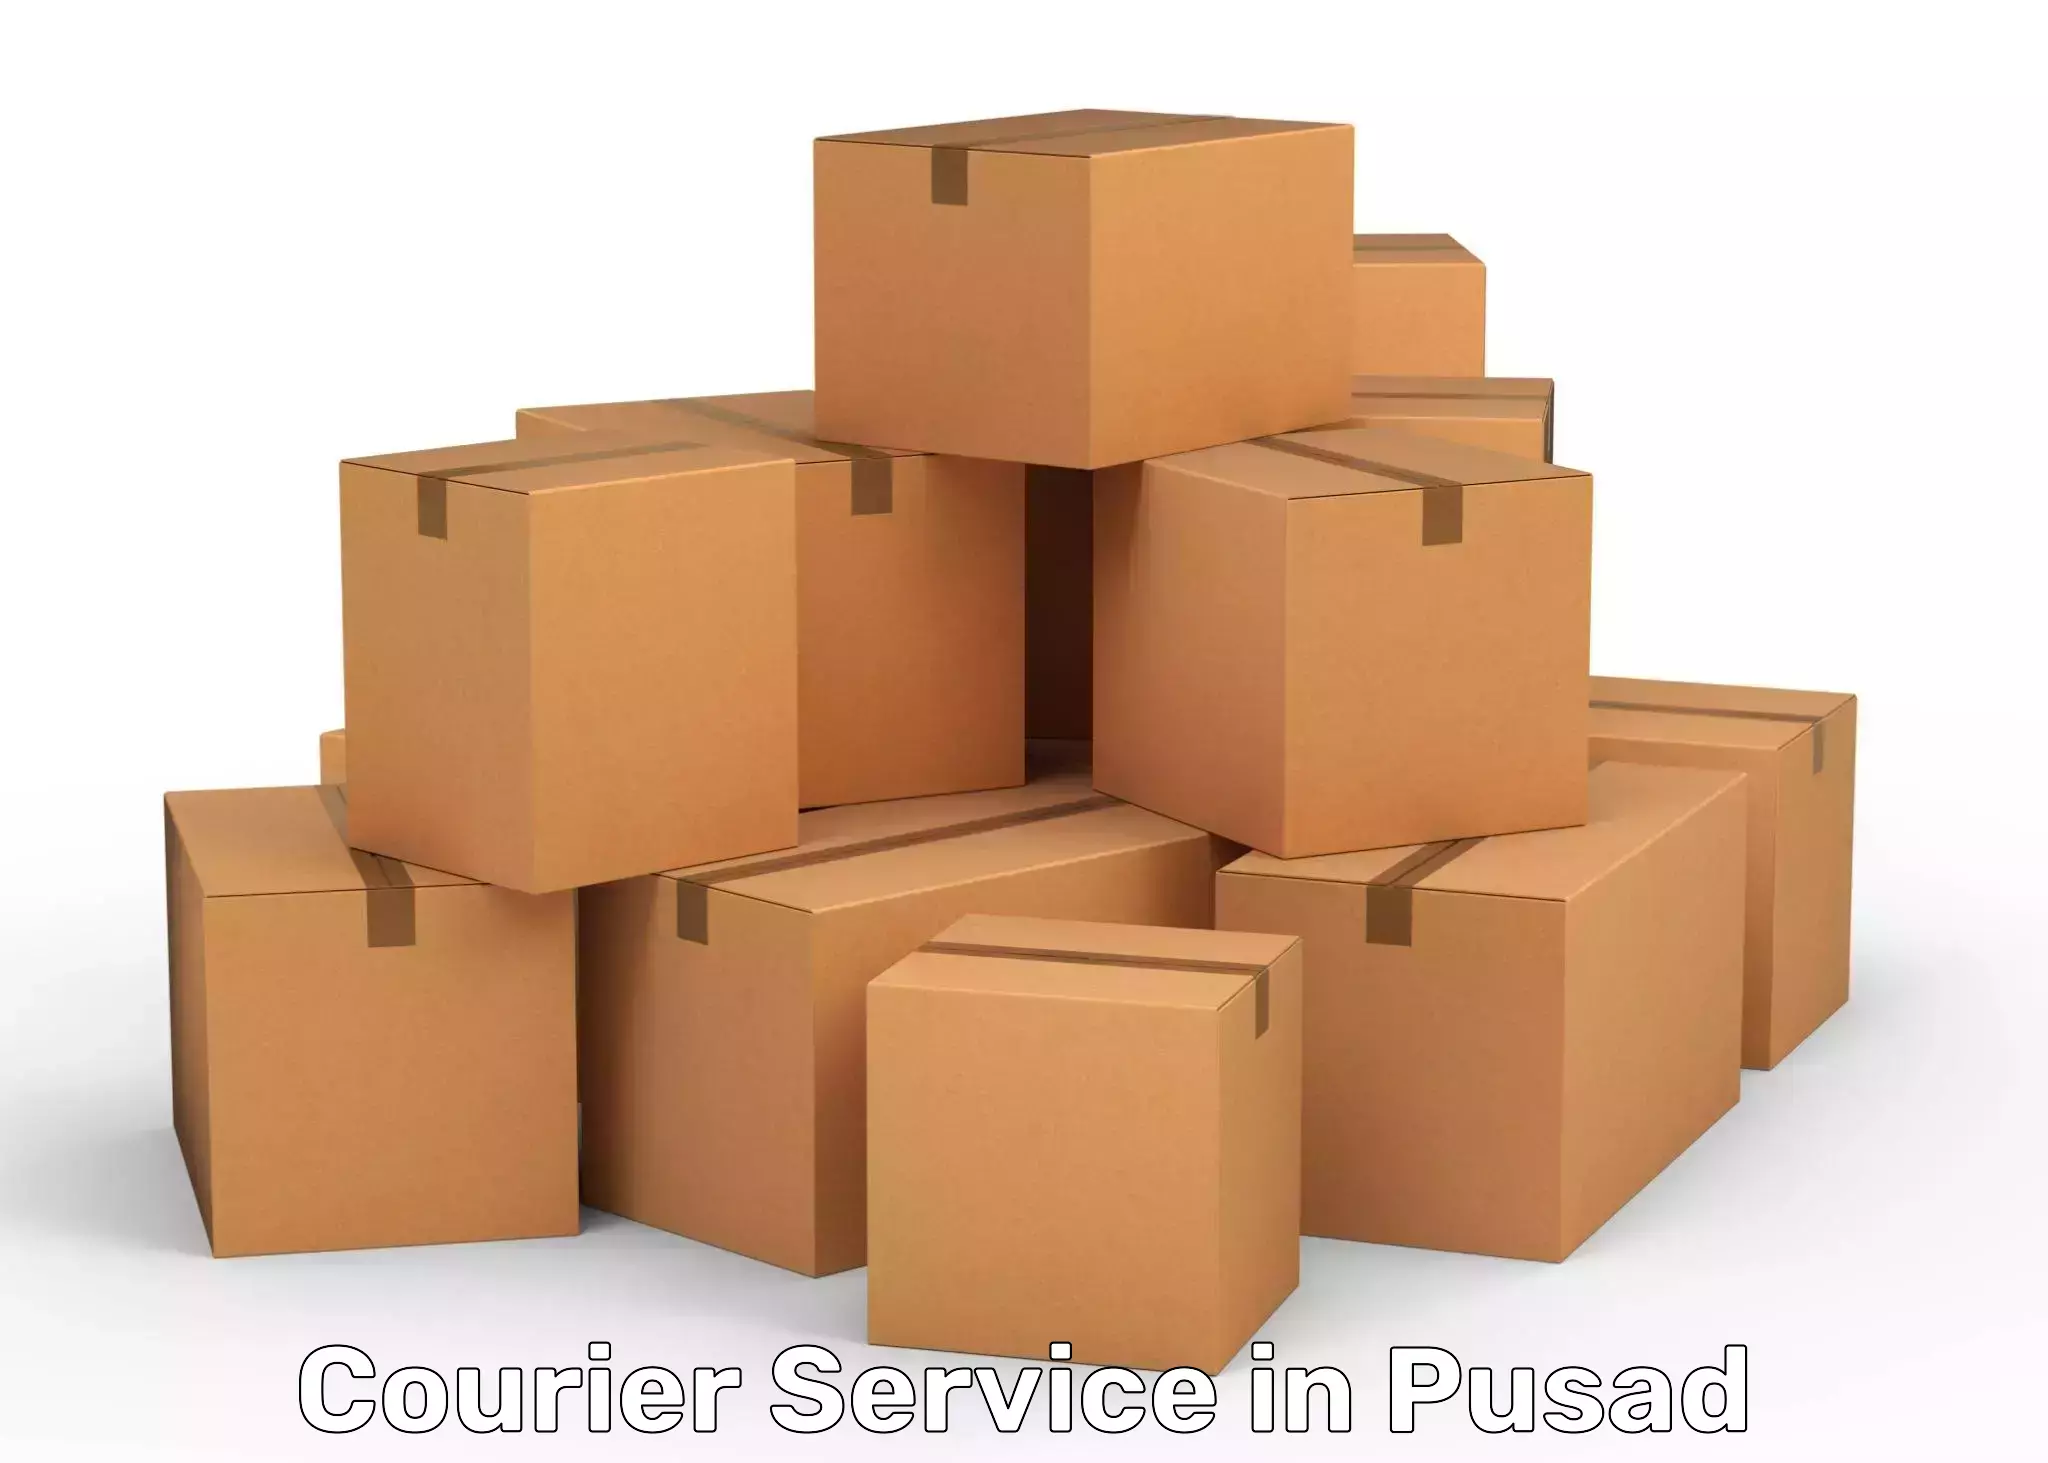 Efficient freight service in Pusad